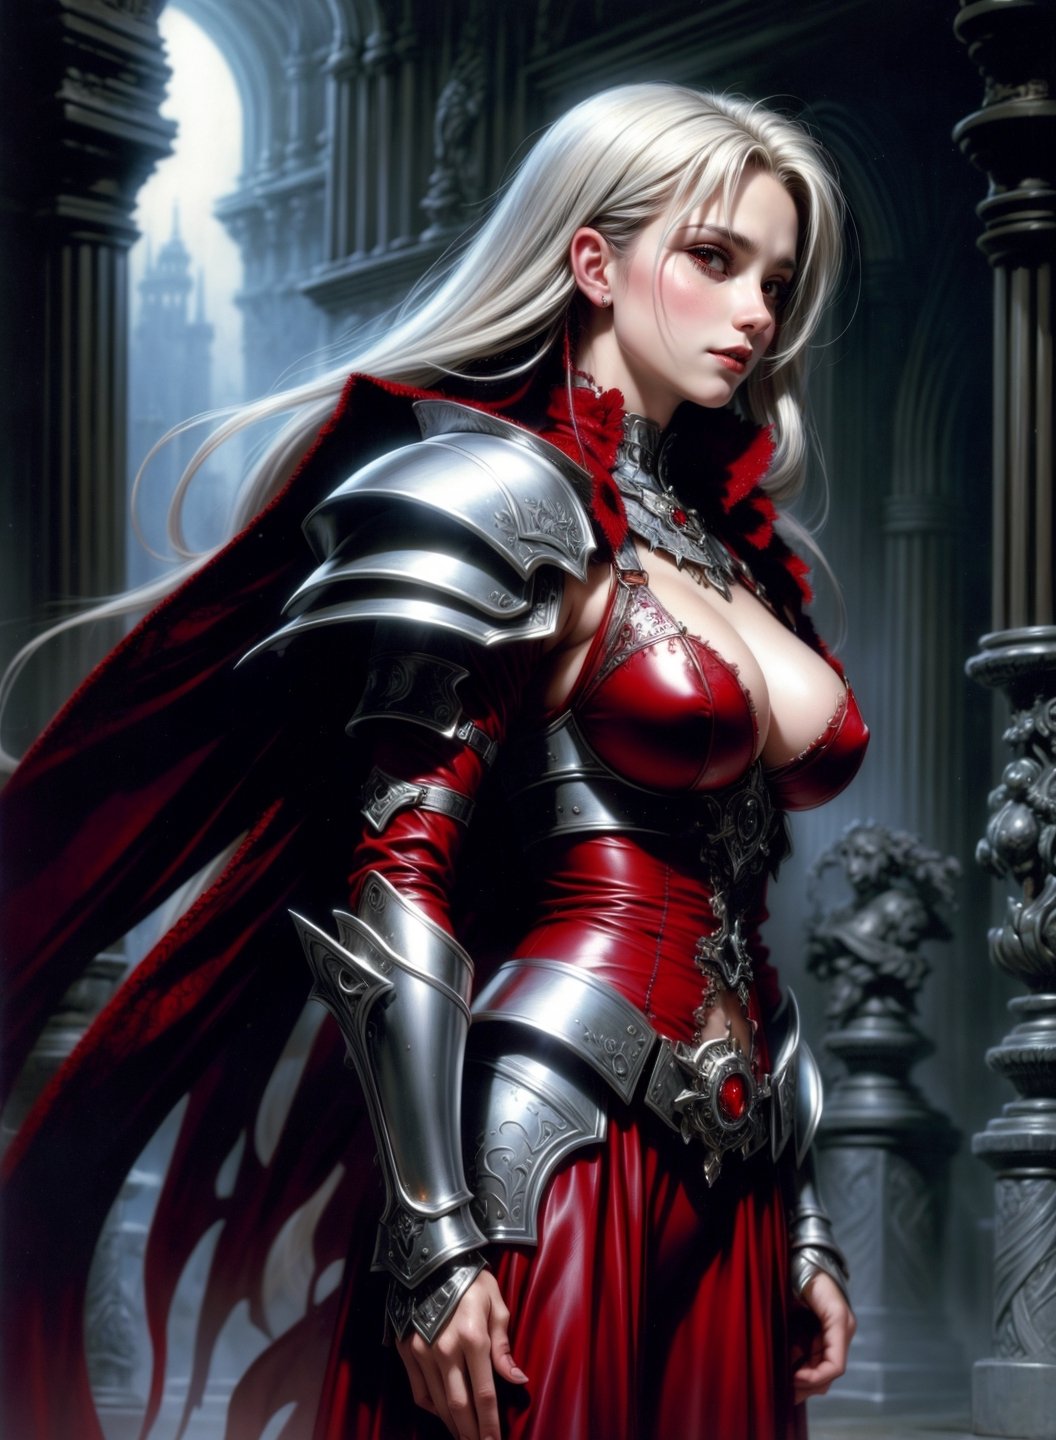 A vampire queen by Luis Royo, intricately ornated silver armor over a fine red leather dress